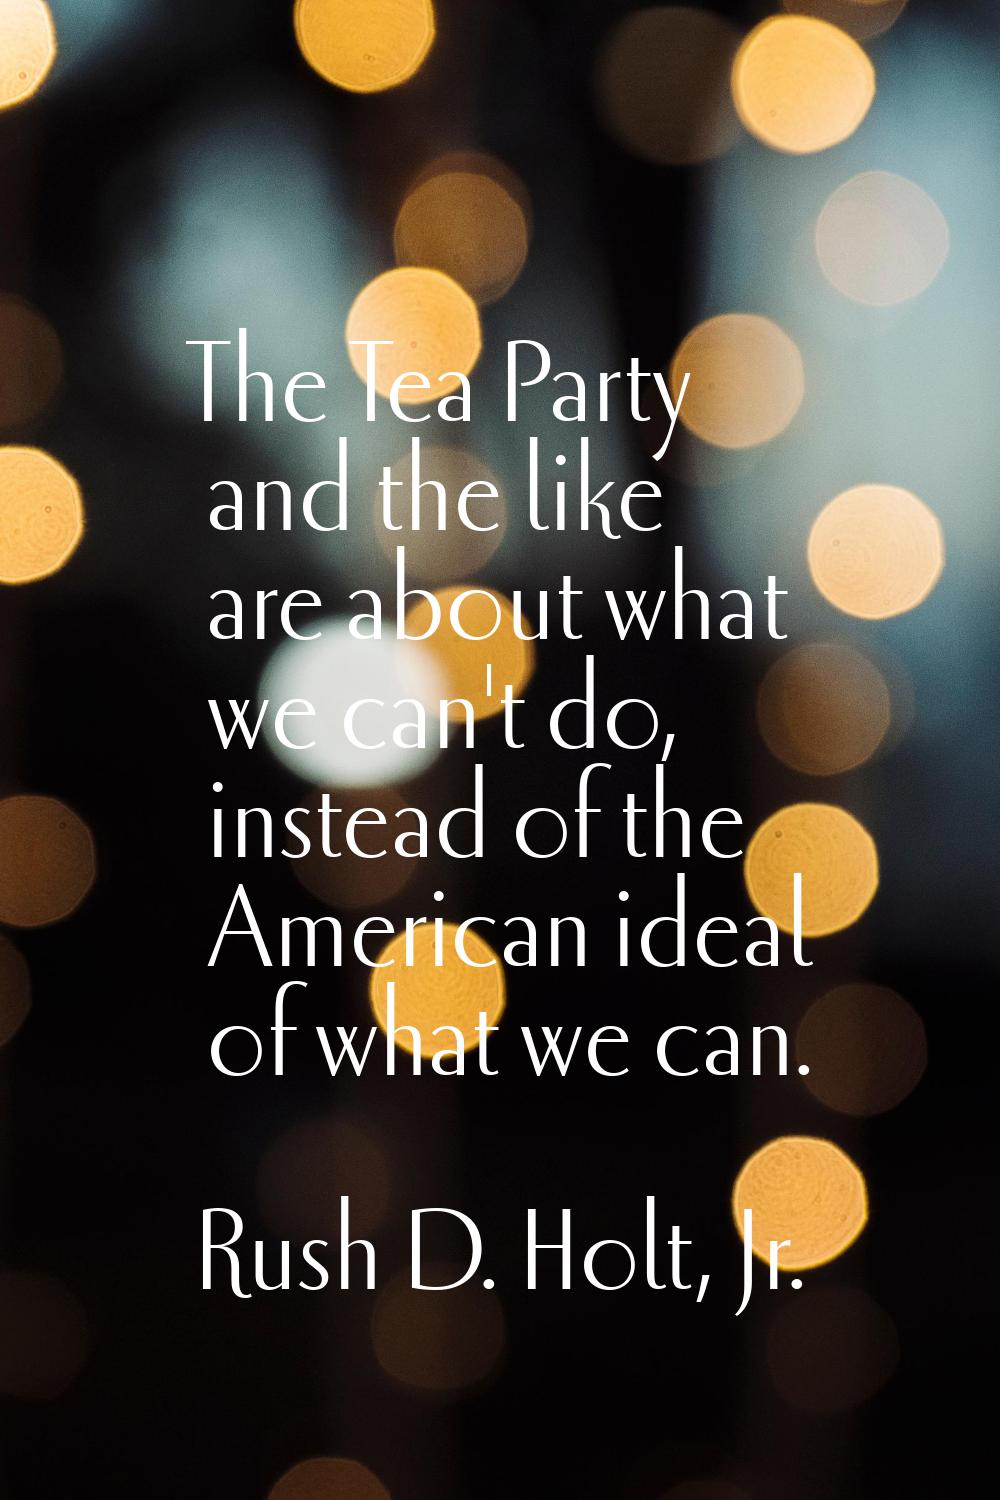 The Tea Party and the like are about what we can't do, instead of the American ideal of what we can